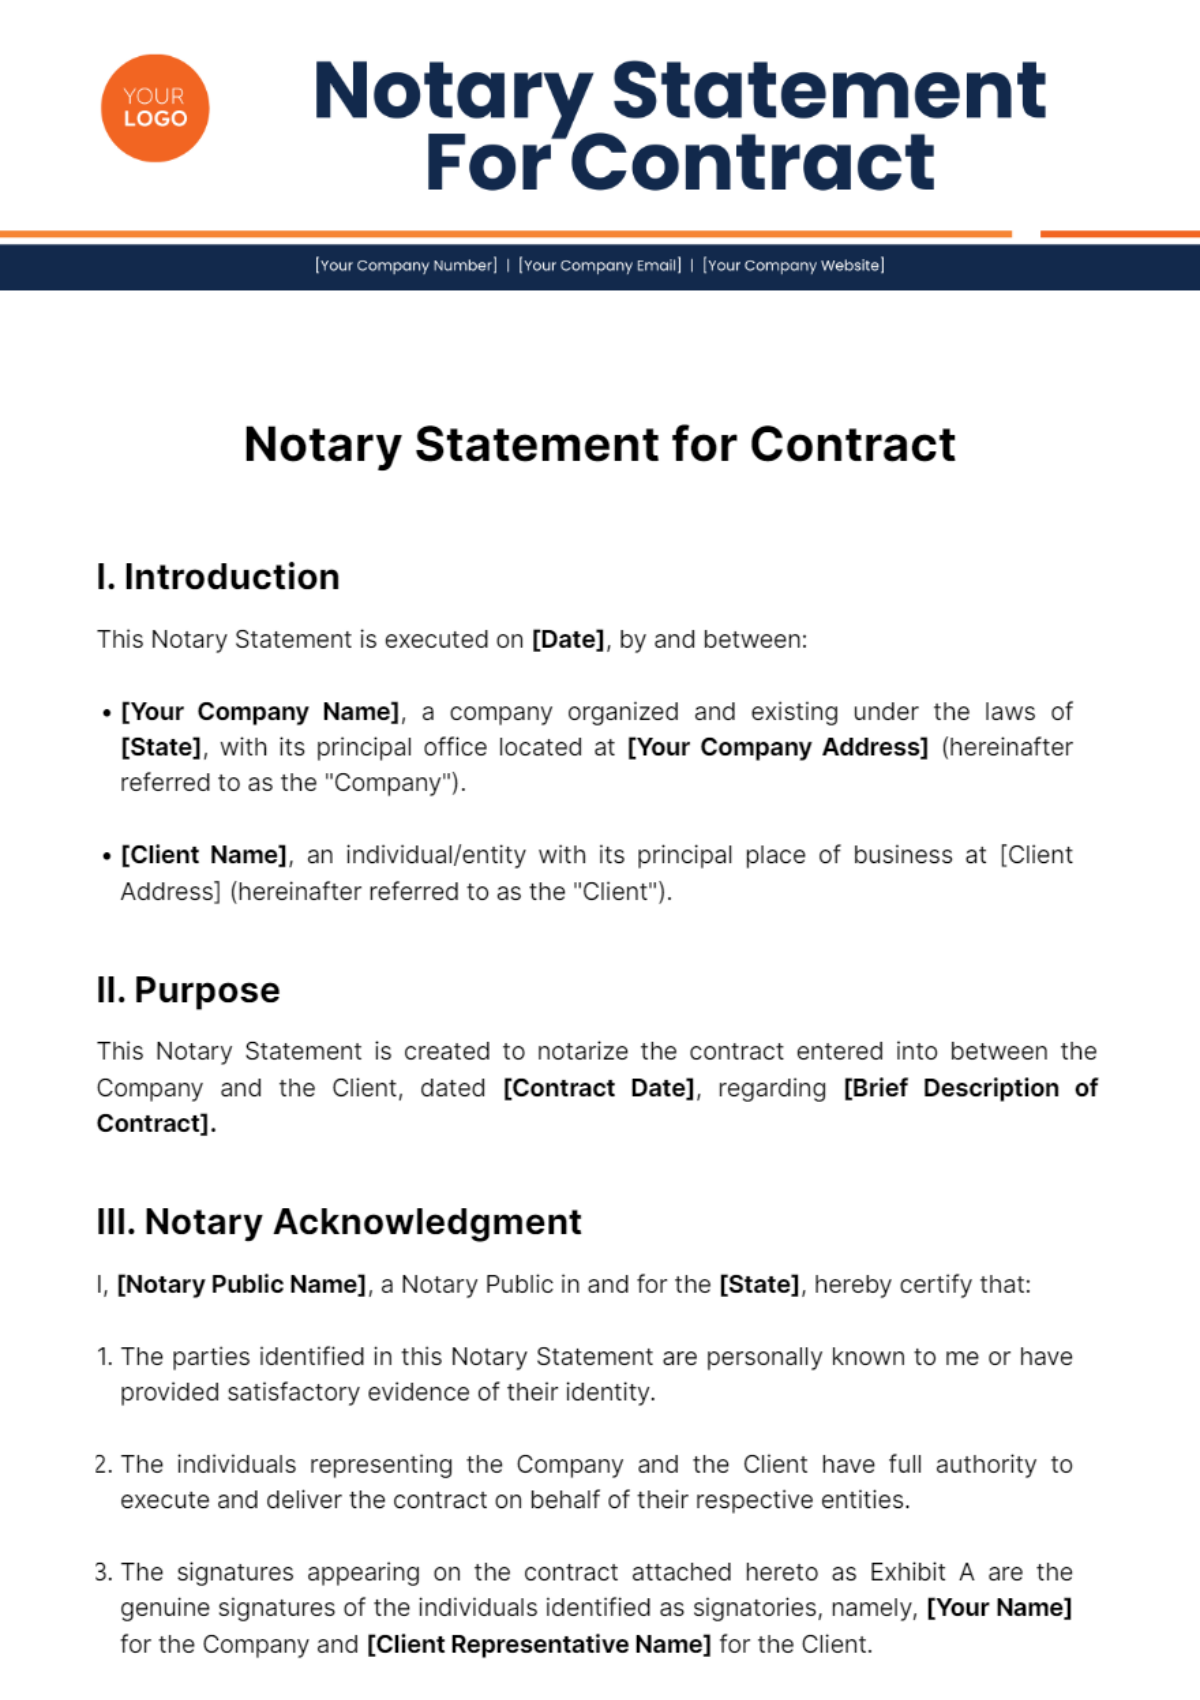 Notary Statement For Contract Template